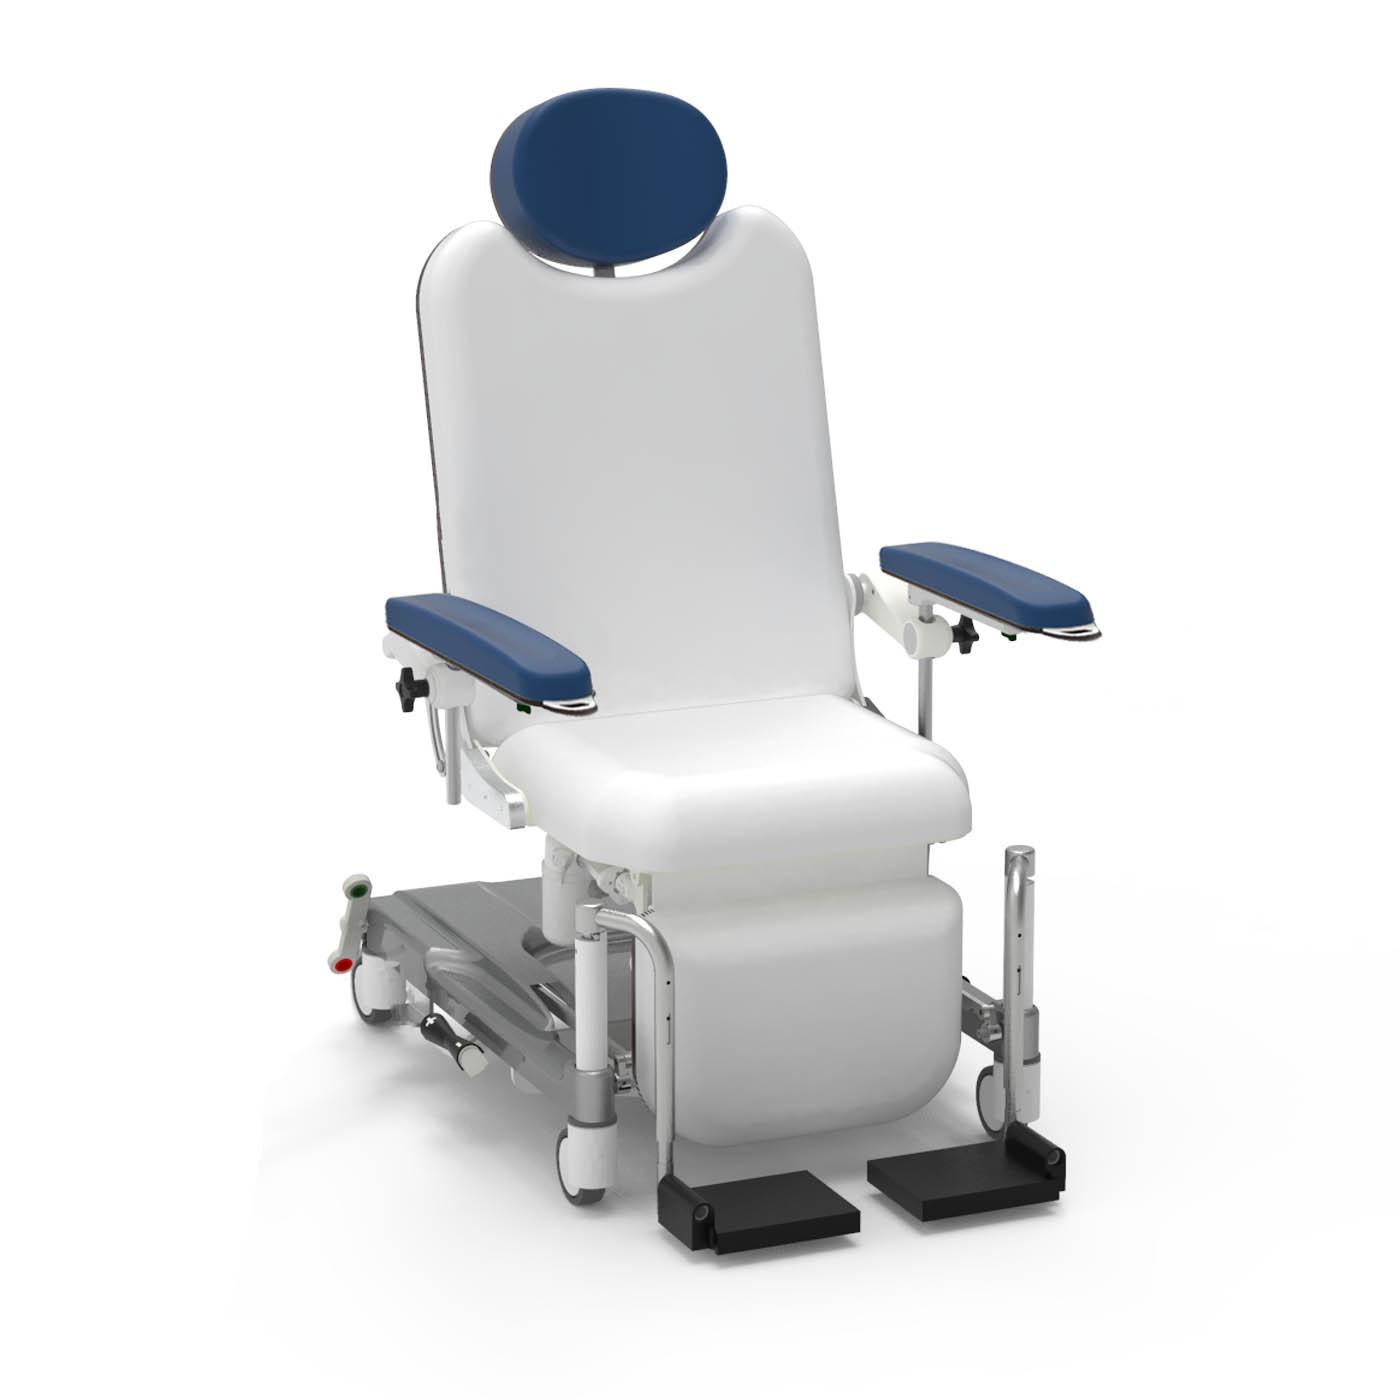 Mock up of a hospital patient rehabilitation chair with wheels. The chair has been stripped and removed of all padding for easier cleaning.